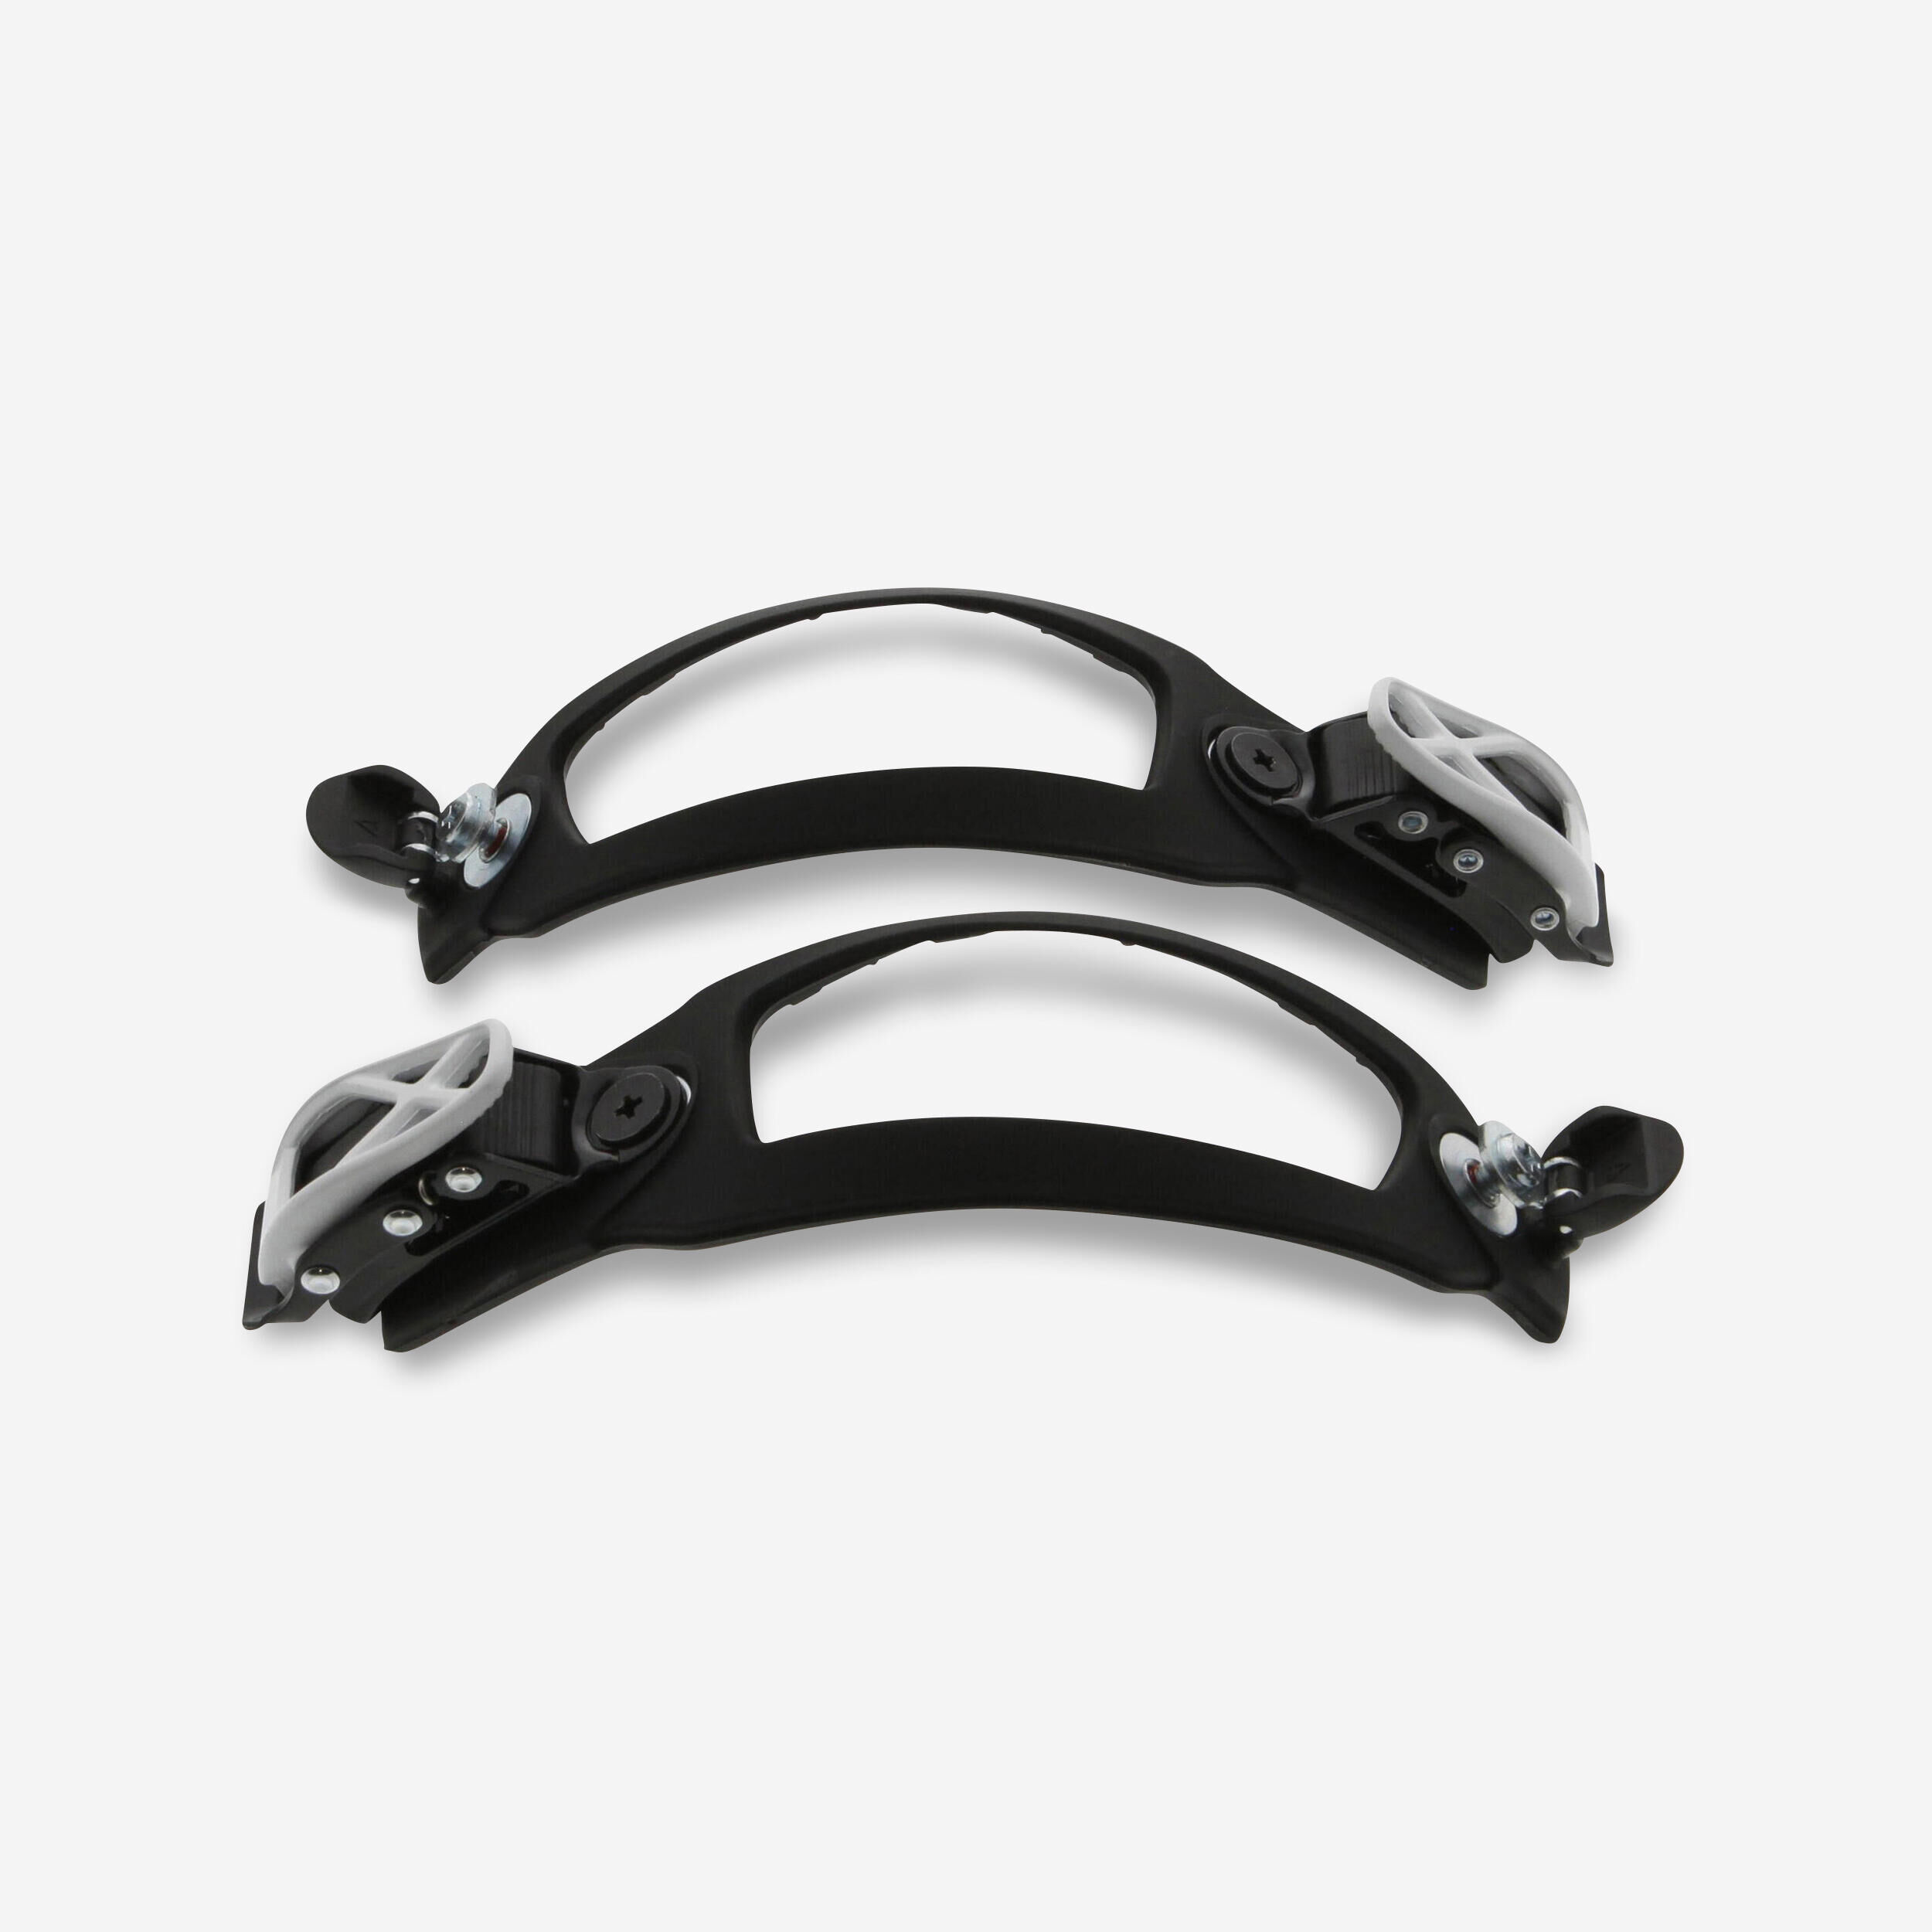 DREAMSCAPE 2 toe straps for 1 pair of SNB 500 snowboard bindings in size M (3/7)